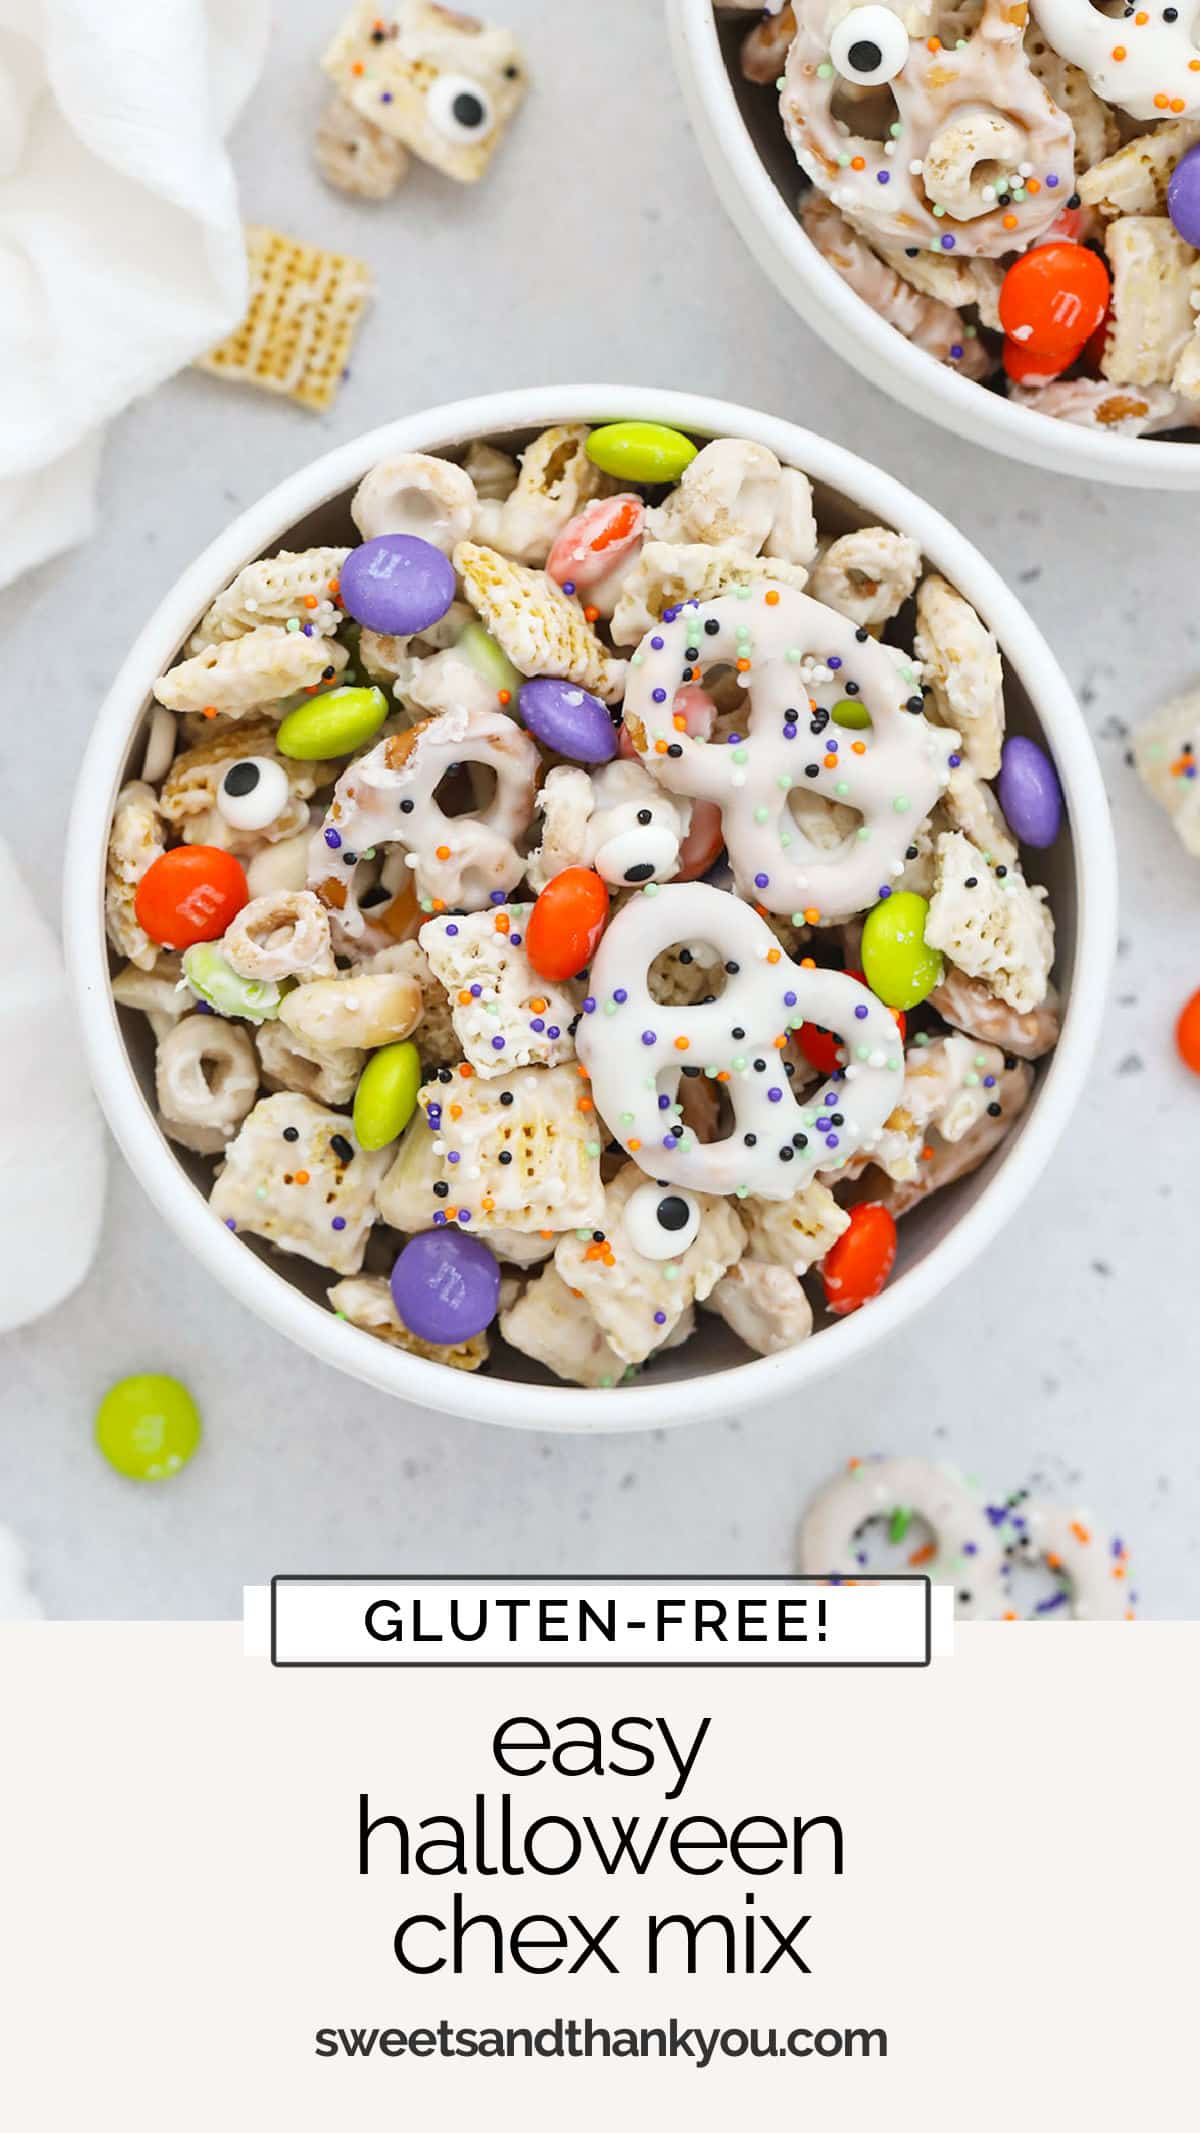 This crispy, crunchy Halloween Chex Mix is perfect for spooky season! Don't miss all the yummy mix-ins for this Halloween snack mix below. / gluten-free Halloween snack mix / gluten-free Halloween snack / gluten-free Halloween dessert / gluten-free halloween chex mix / gluten-free Halloween treat / fall snack mix recipe / fall chex mix recipe